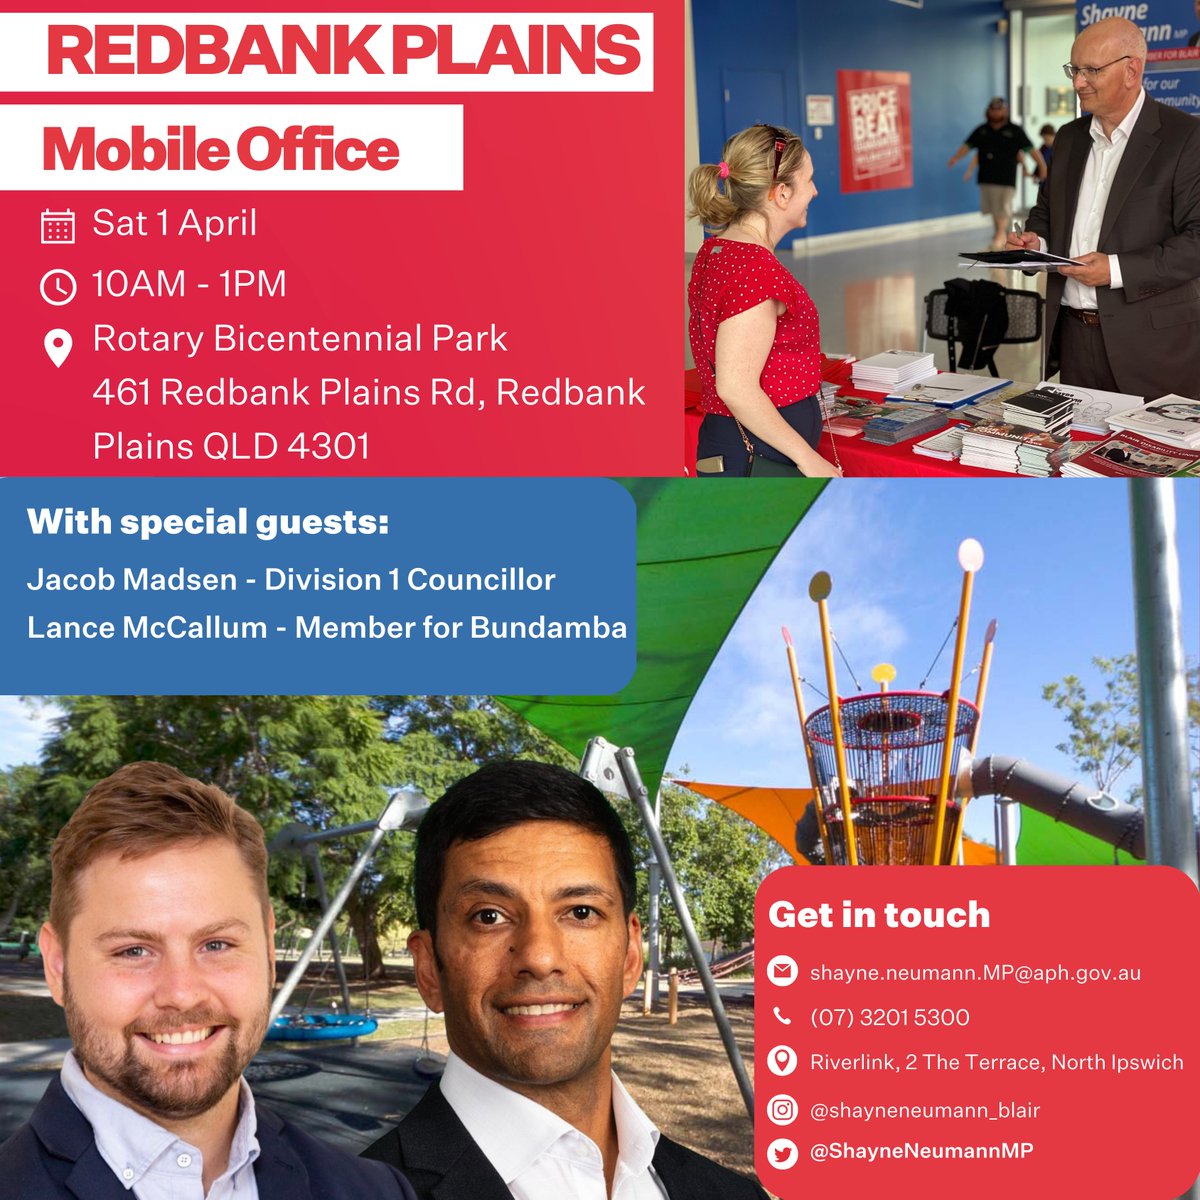 Shayne Neumann: This Saturday I will be holding a BBQ & Mobile Office at Redbank …